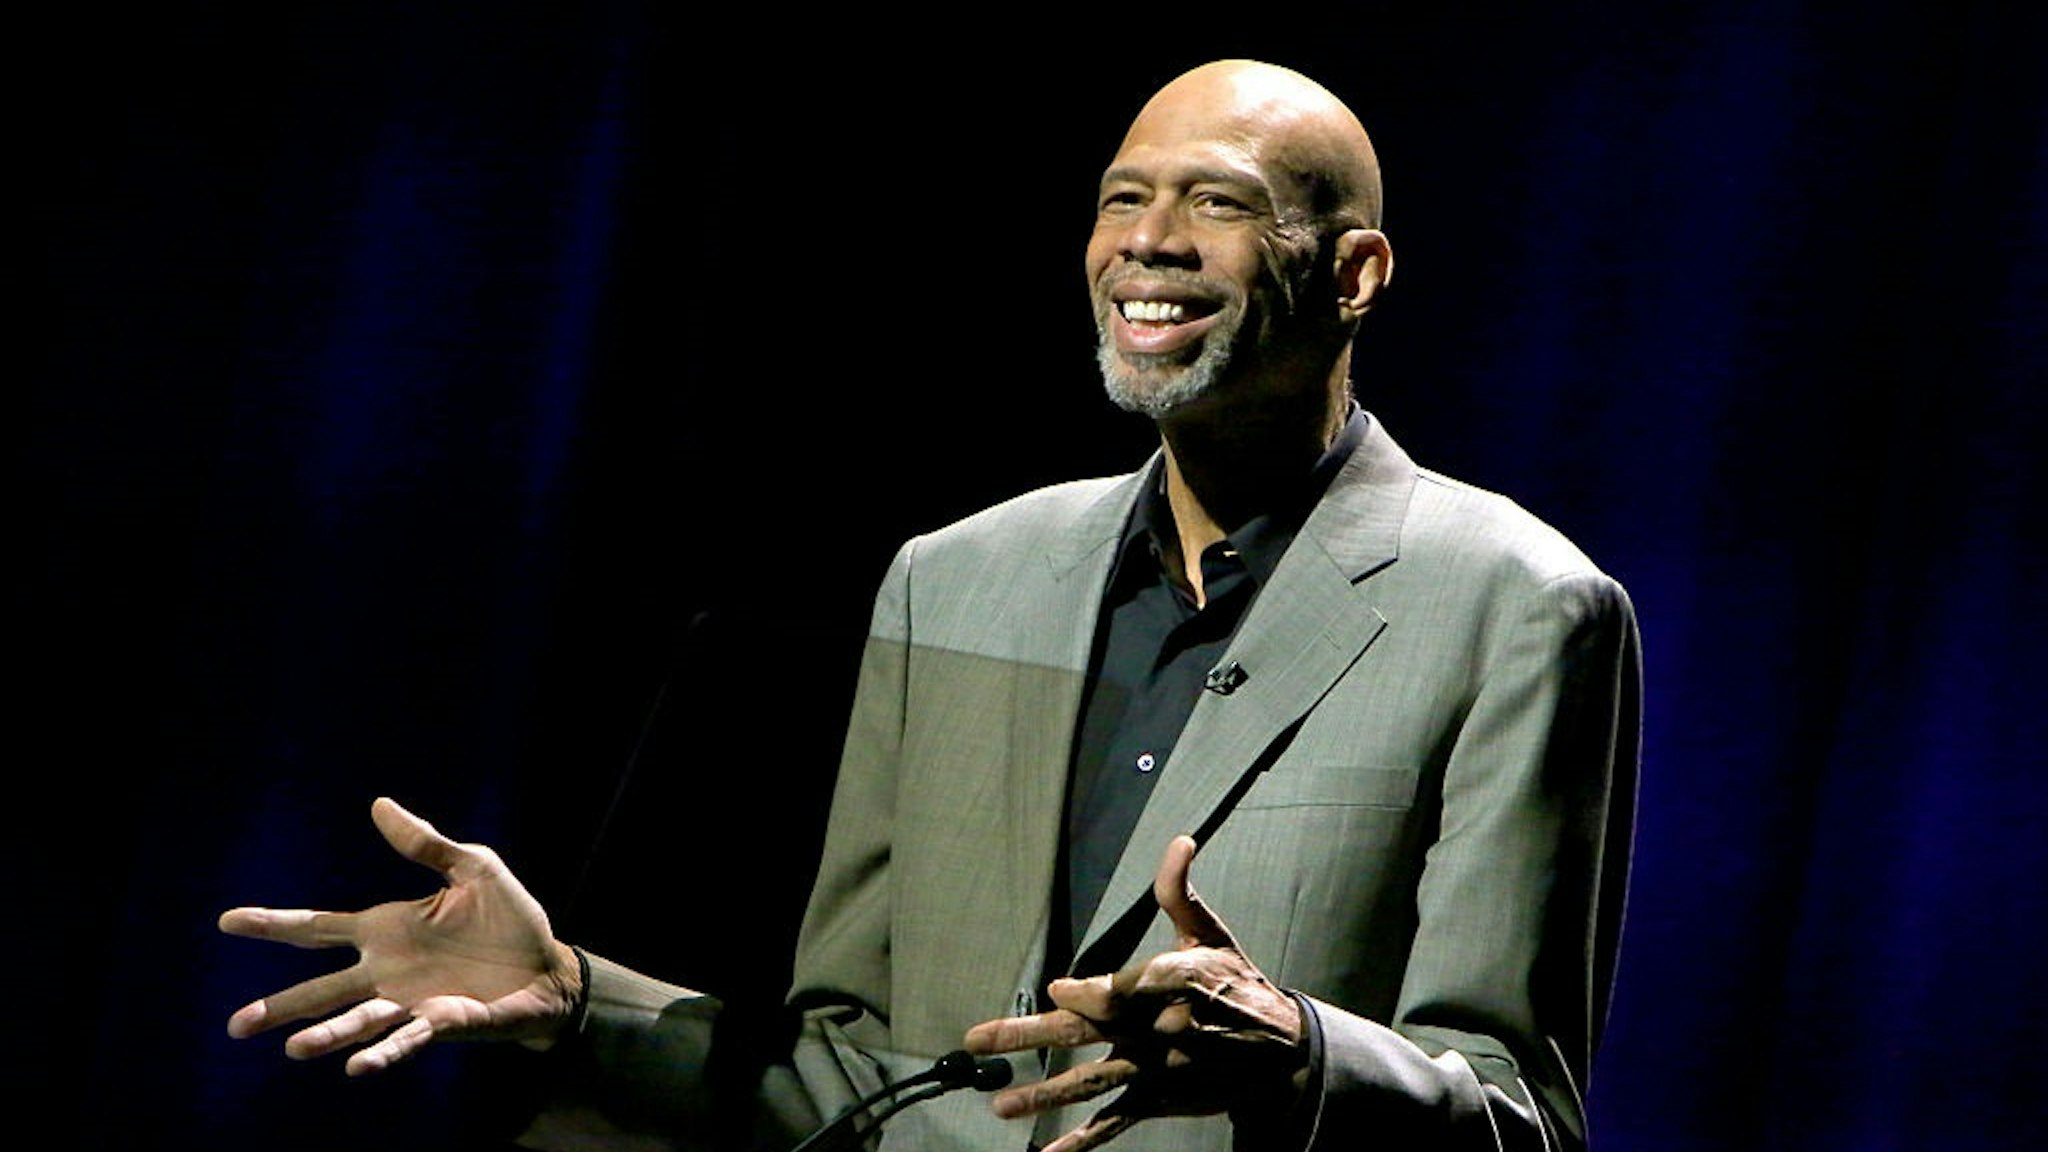 HOLLYWOOD, CA - NOVEMBER 15: Dee Kareem Abdul-Jabbar speaks onstage during the Thelonious Monk Institute International Jazz Vocals Competition 2015 at Dolby Theatre on November 15, 2015 in Hollywood, California.